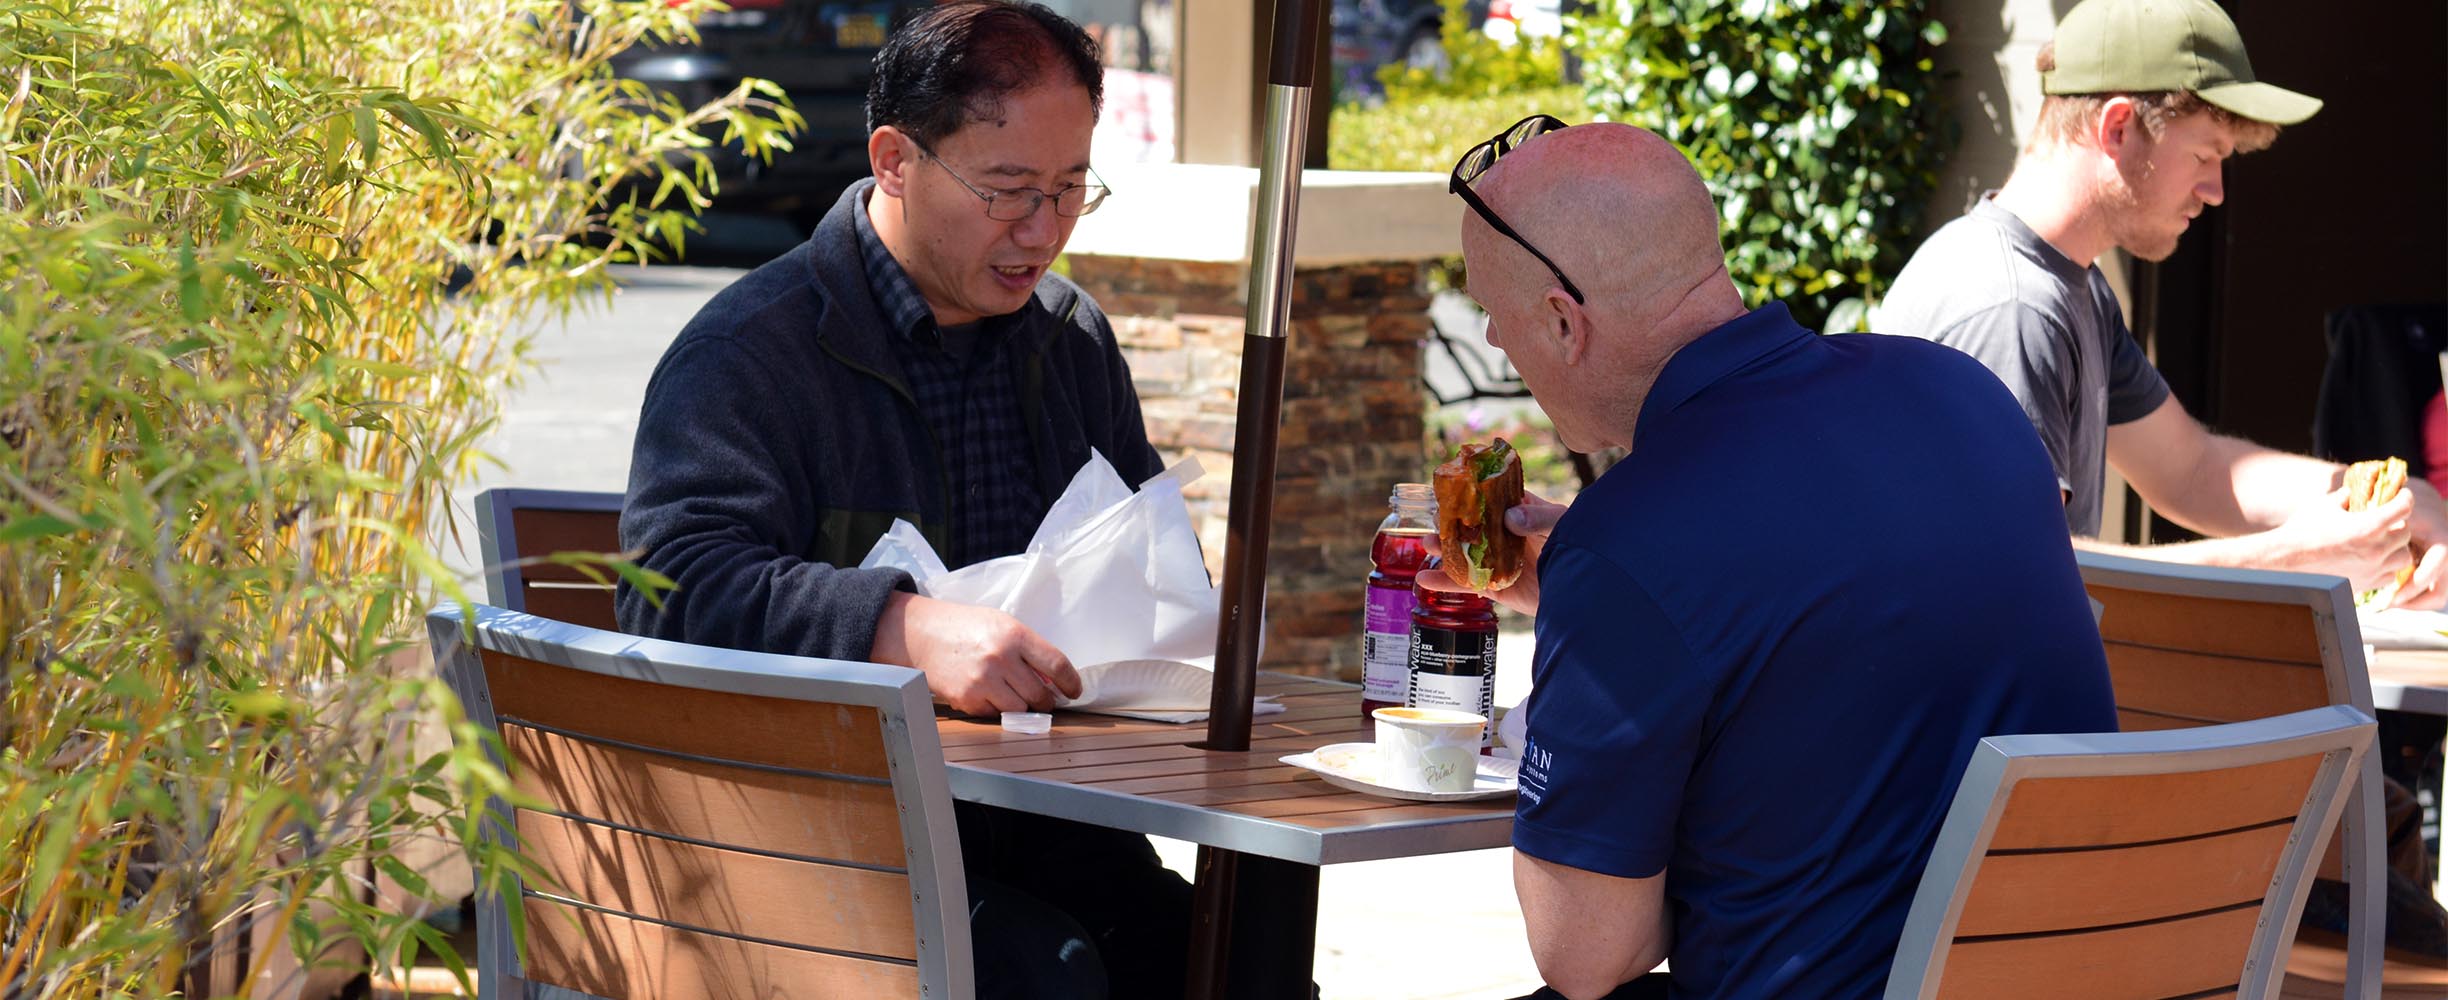 Our clients love the patio sitting to enjoy their sandwiches in Palo Alto